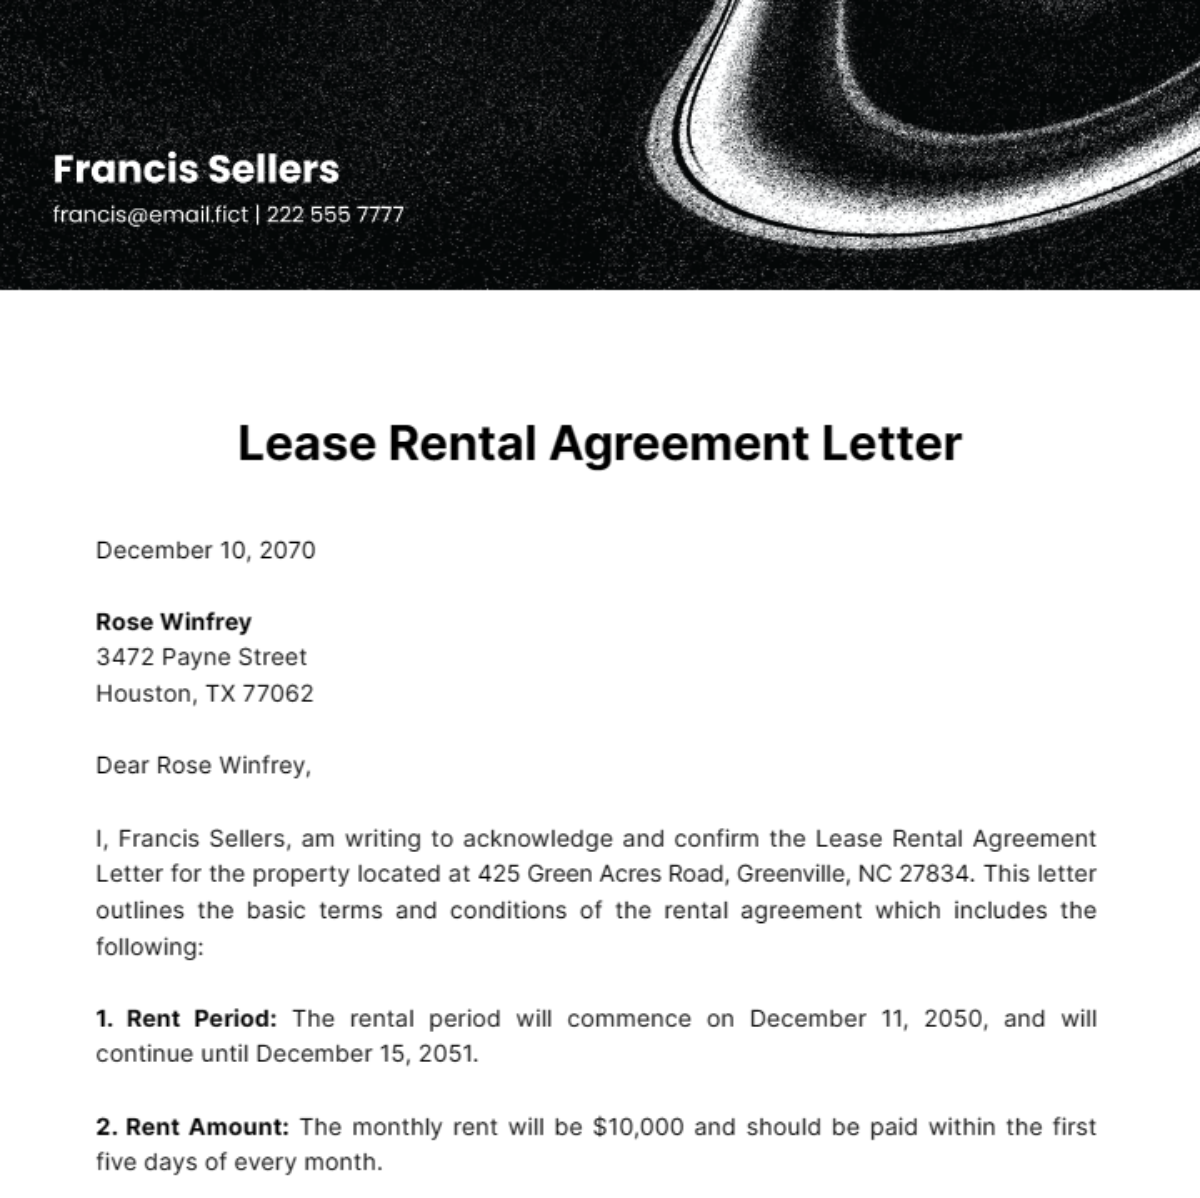 Lease Rental Agreement Letter Template